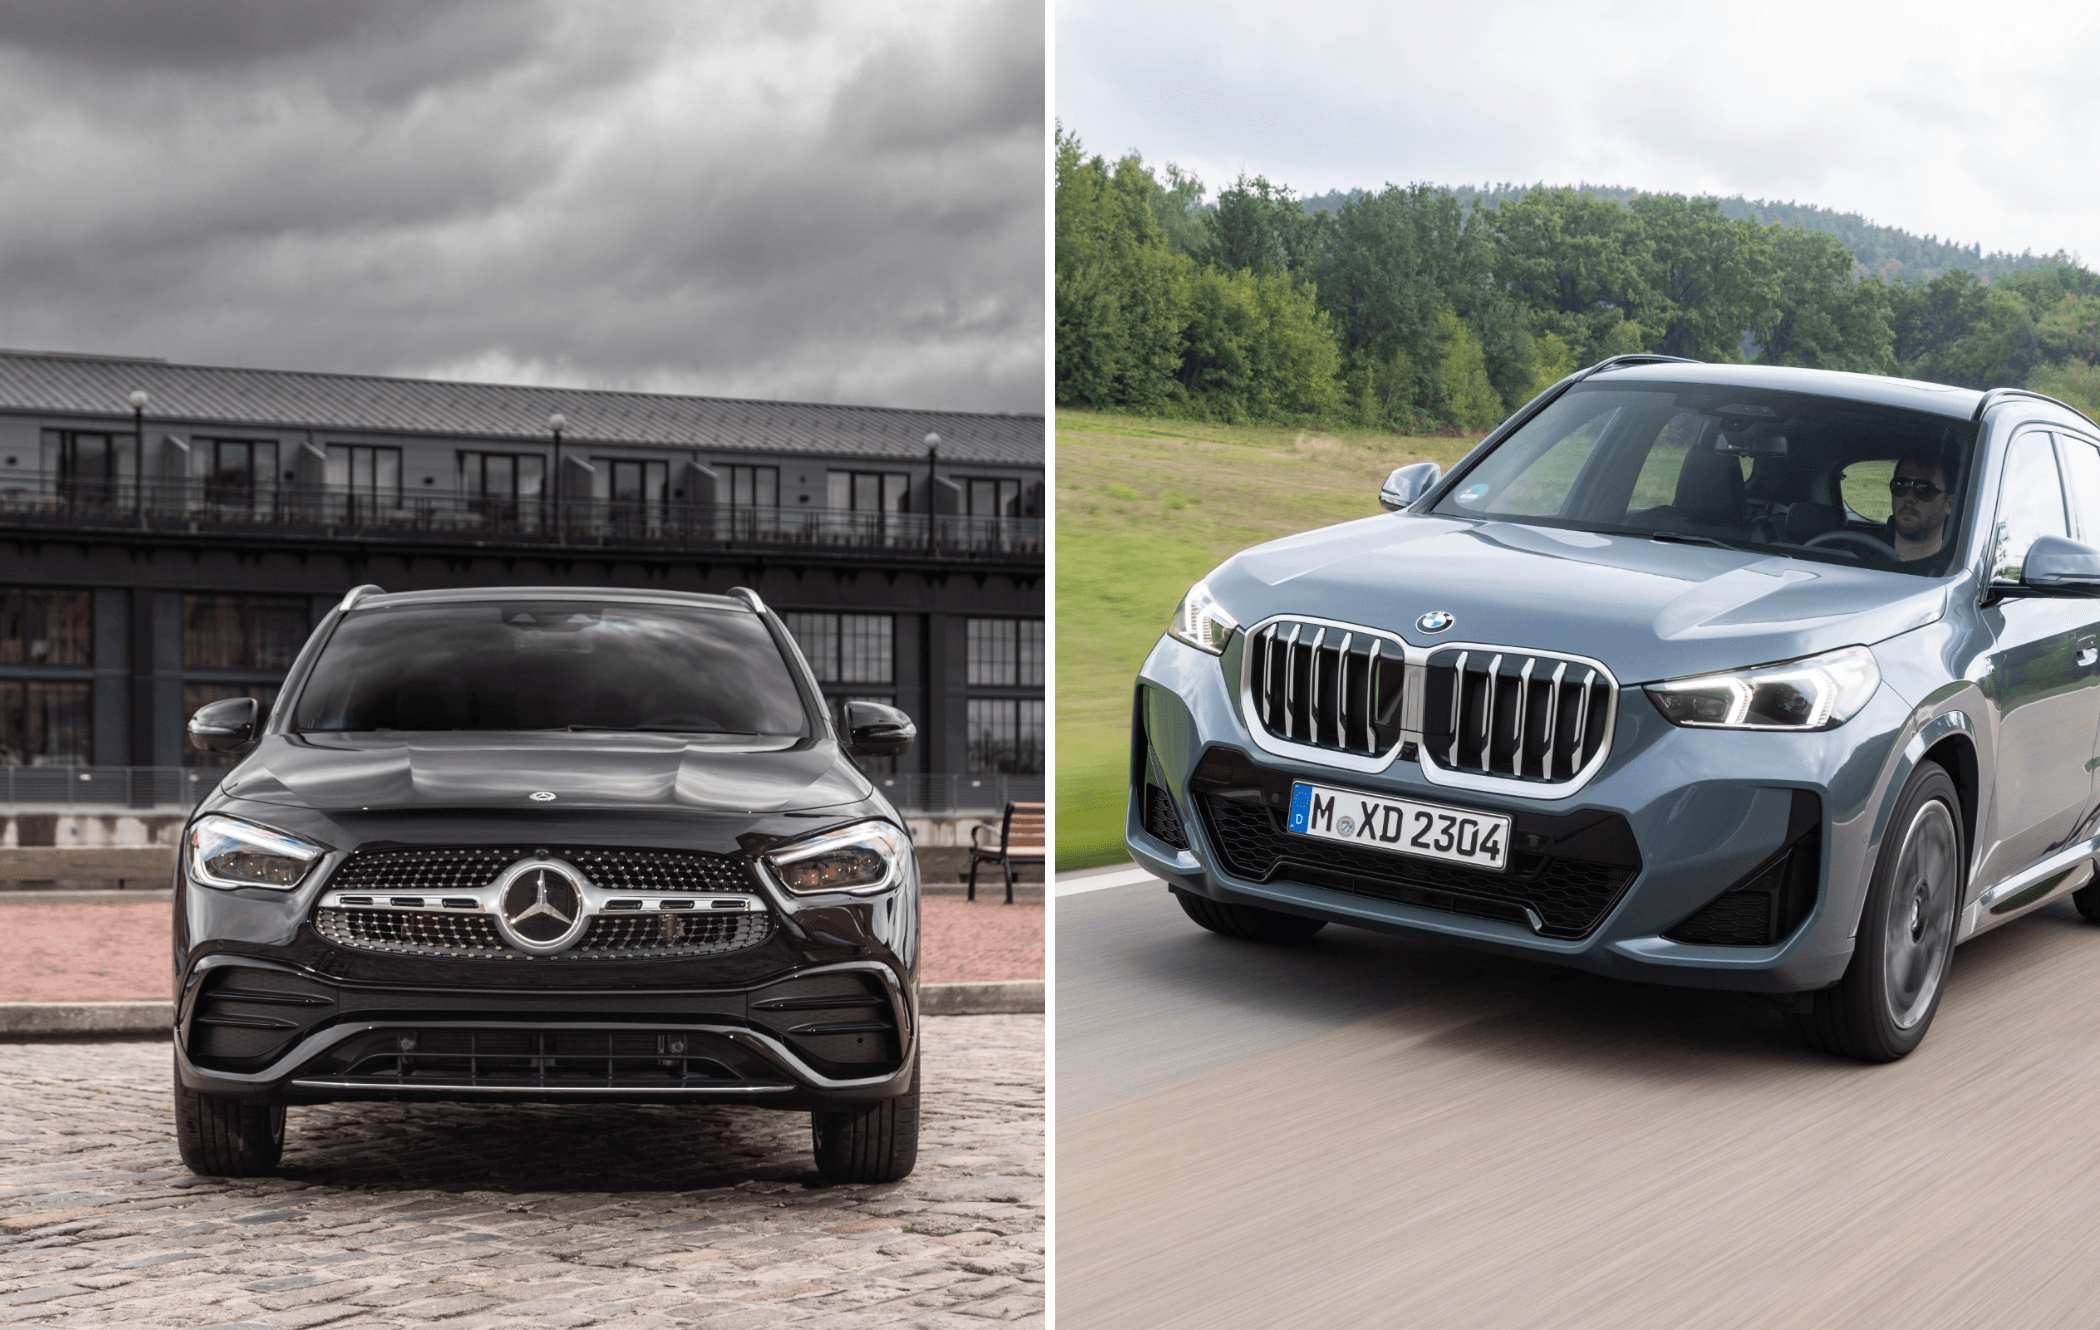 on the left is a black mercedes gla front and on the right is a grey/blue x1 driving on a road